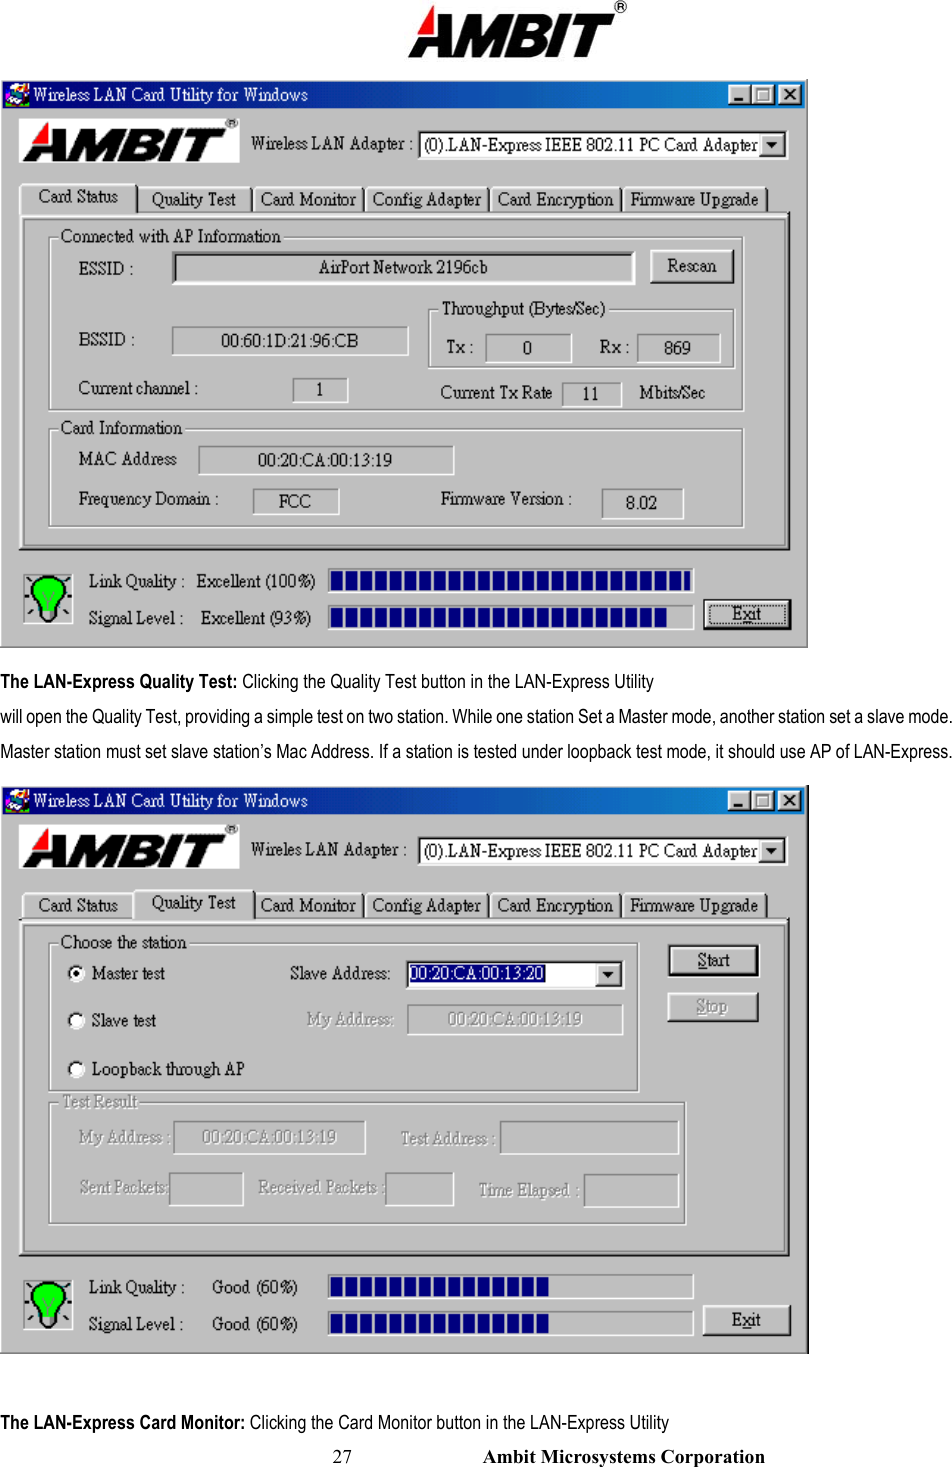                                                                                                          27                           Ambit Microsystems Corporation  The LAN-Express Quality Test: Clicking the Quality Test button in the LAN-Express Utility will open the Quality Test, providing a simple test on two station. While one station Set a Master mode, another station set a slave mode. Master station must set slave station’s Mac Address. If a station is tested under loopback test mode, it should use AP of LAN-Express.   The LAN-Express Card Monitor: Clicking the Card Monitor button in the LAN-Express Utility 